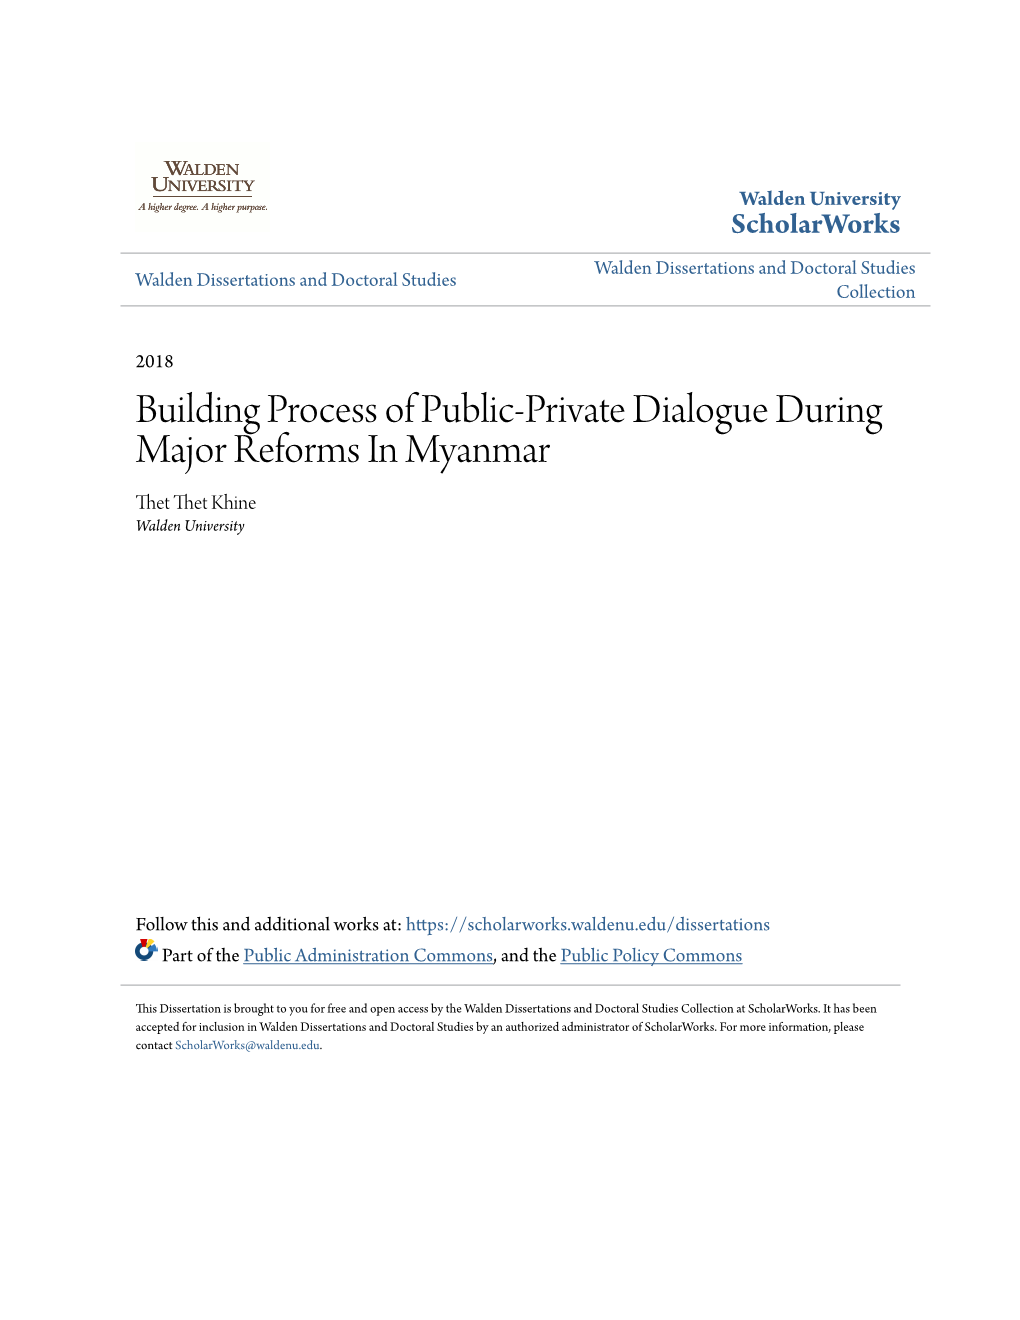 Building Process of Public-Private Dialogue During Major Reforms in Myanmar Thet Thet Khine Walden University